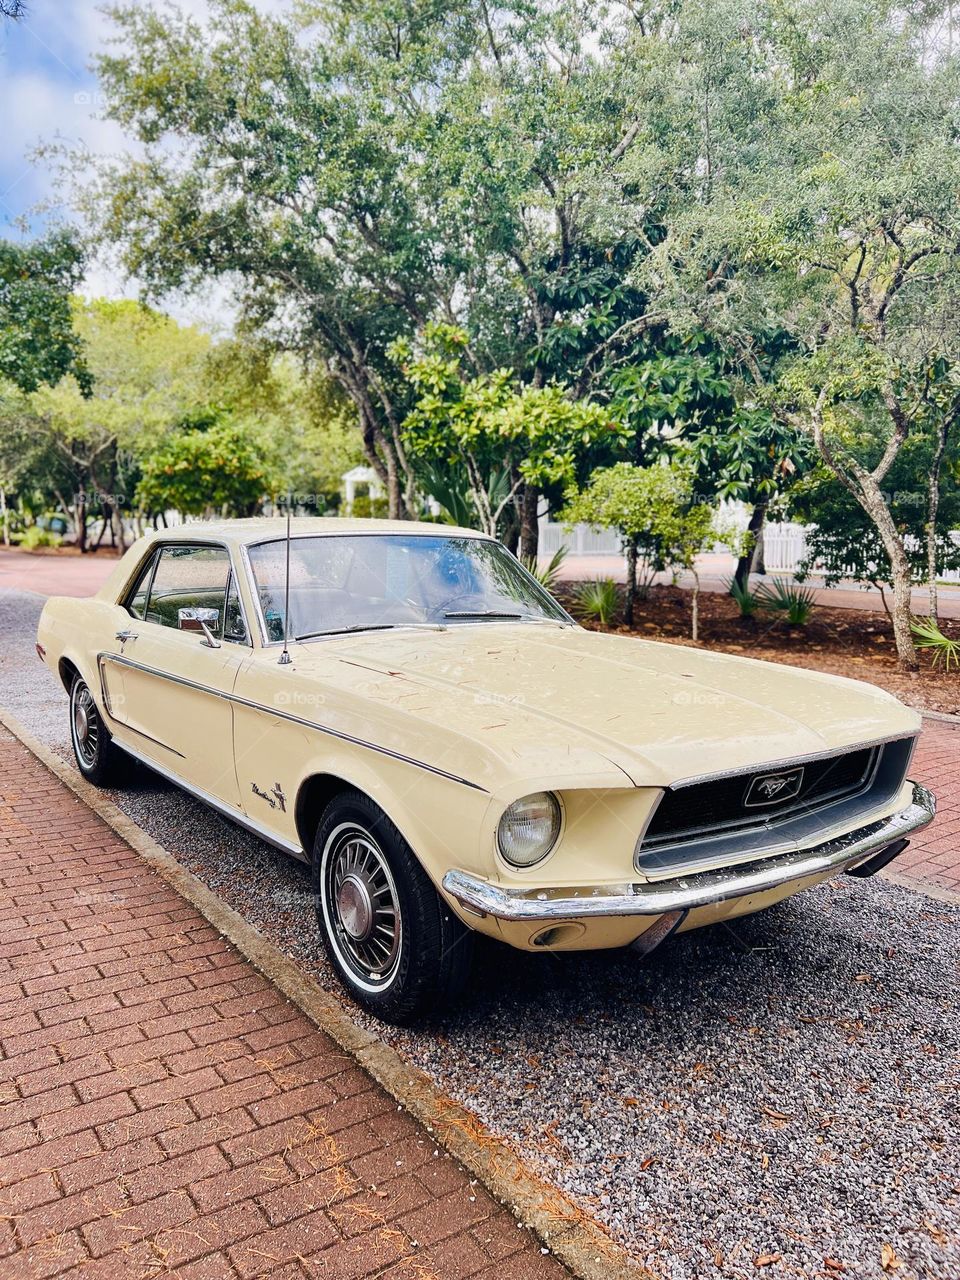 Pale yellow antique Ford Mustang parked along a tree lined brick walkway. An American classic car.